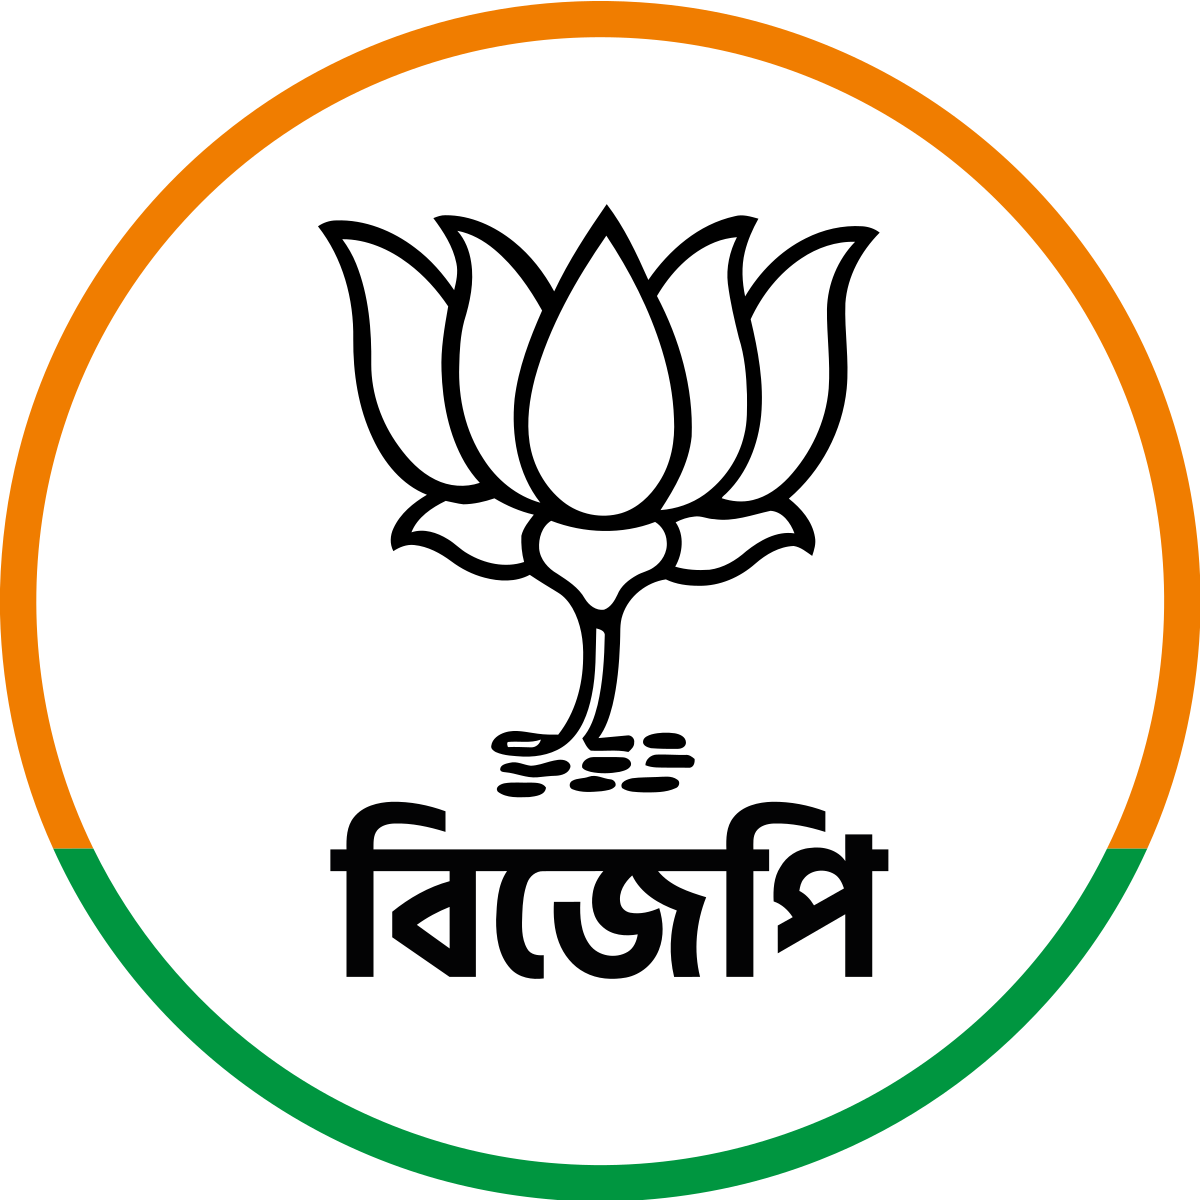 Bjp Flag PNG Transparent, Bjp Flag With Pole, Bjp Flag With Pole Png, Bjp,  Bhartiy Janta Party Flag With Pole PNG Image For Free Download